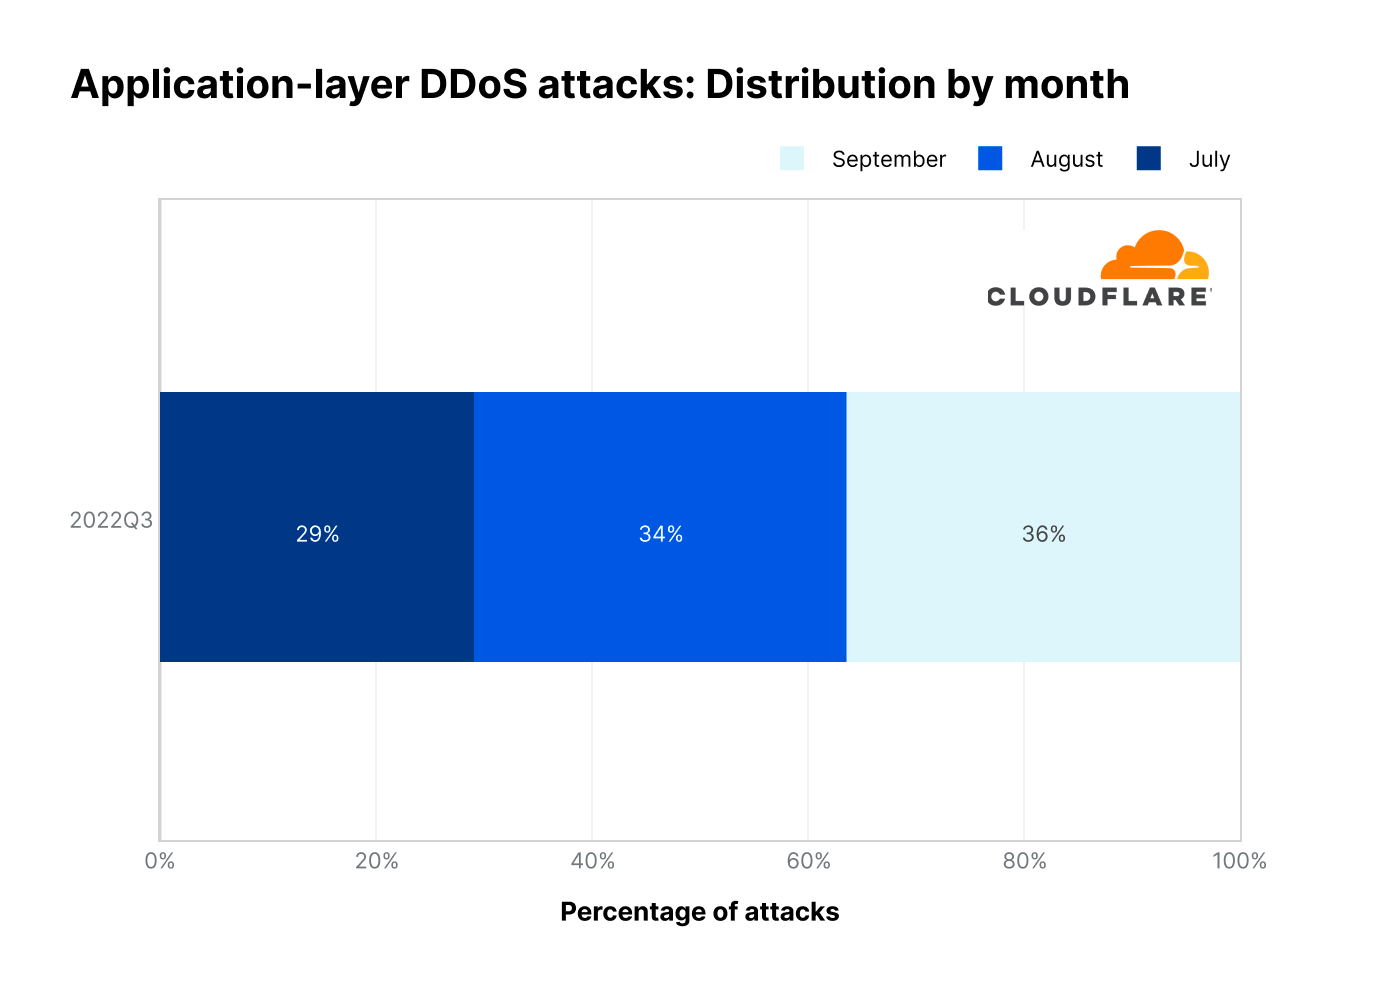 Graph of HTTP DDoS attacks by month in 2022 Q3